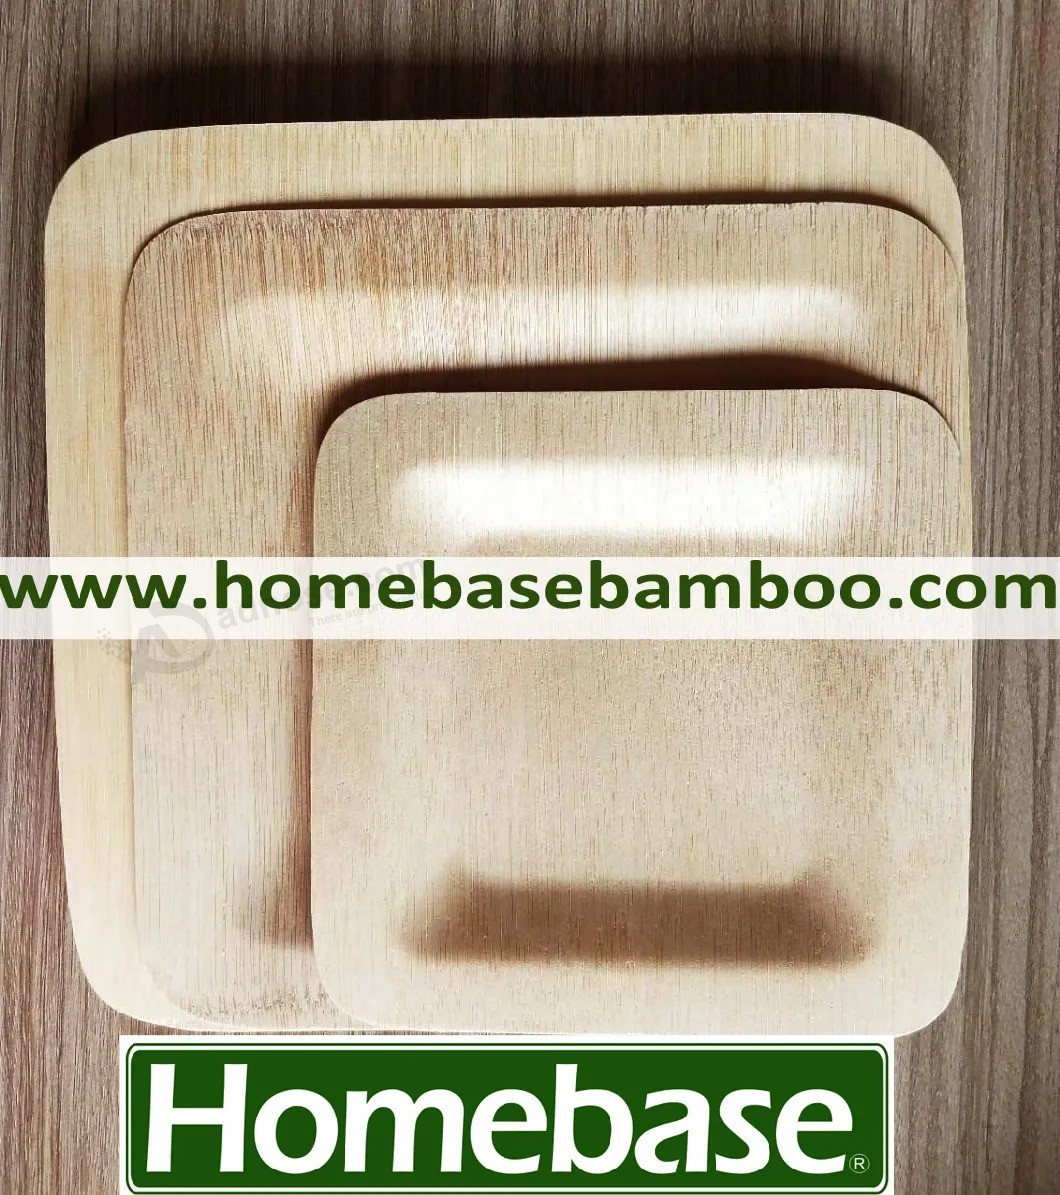 Biodegradable Eco Disposable Bamboo Plate Dinnerware